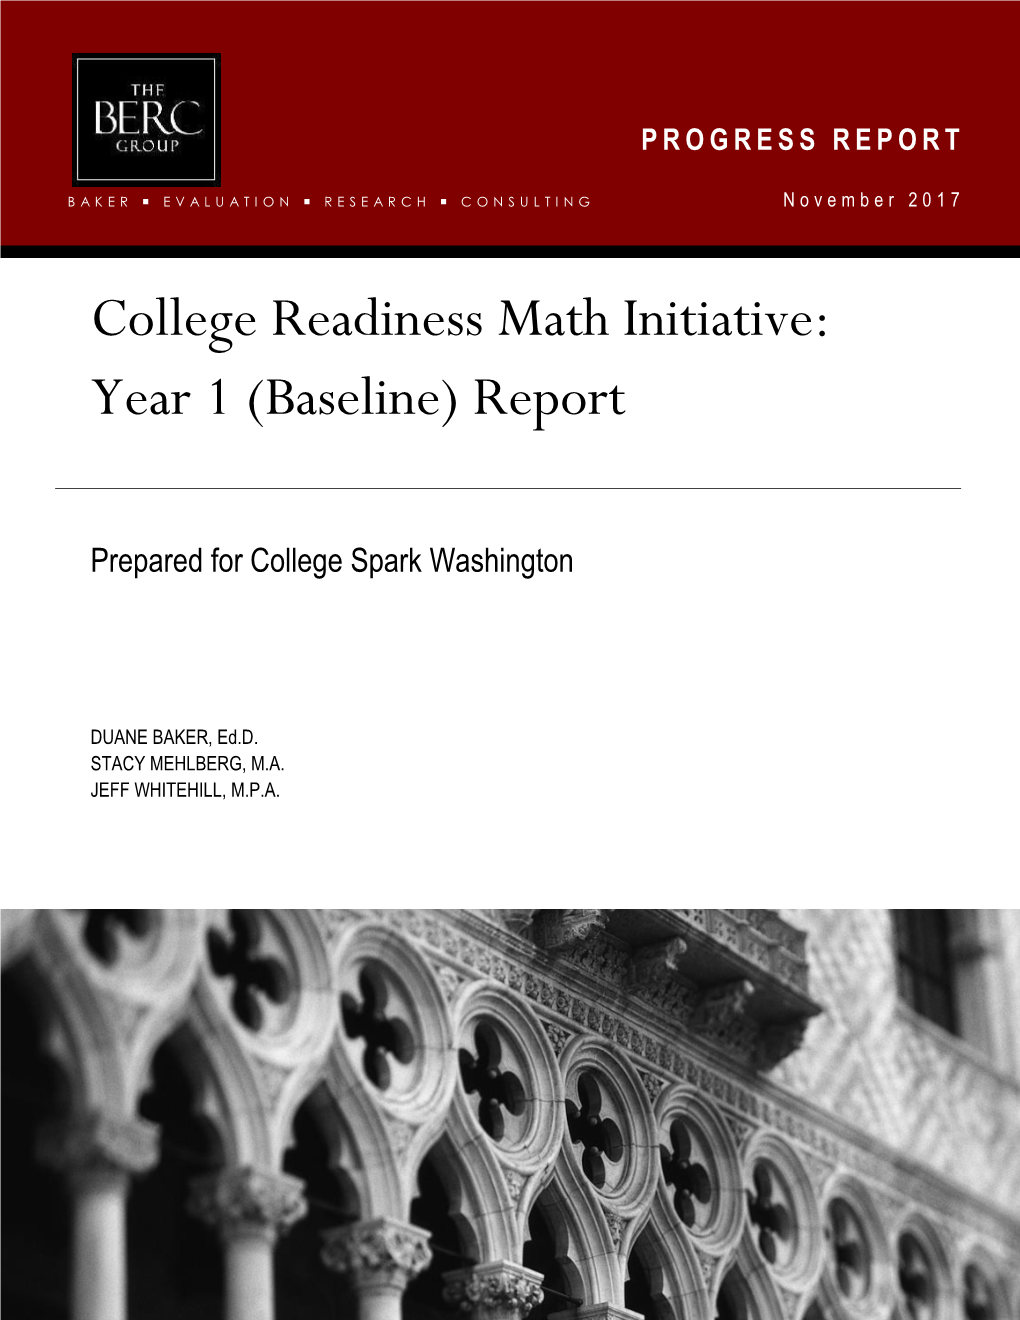 College Readiness Math Initiative: Year 1 (Baseline) Report